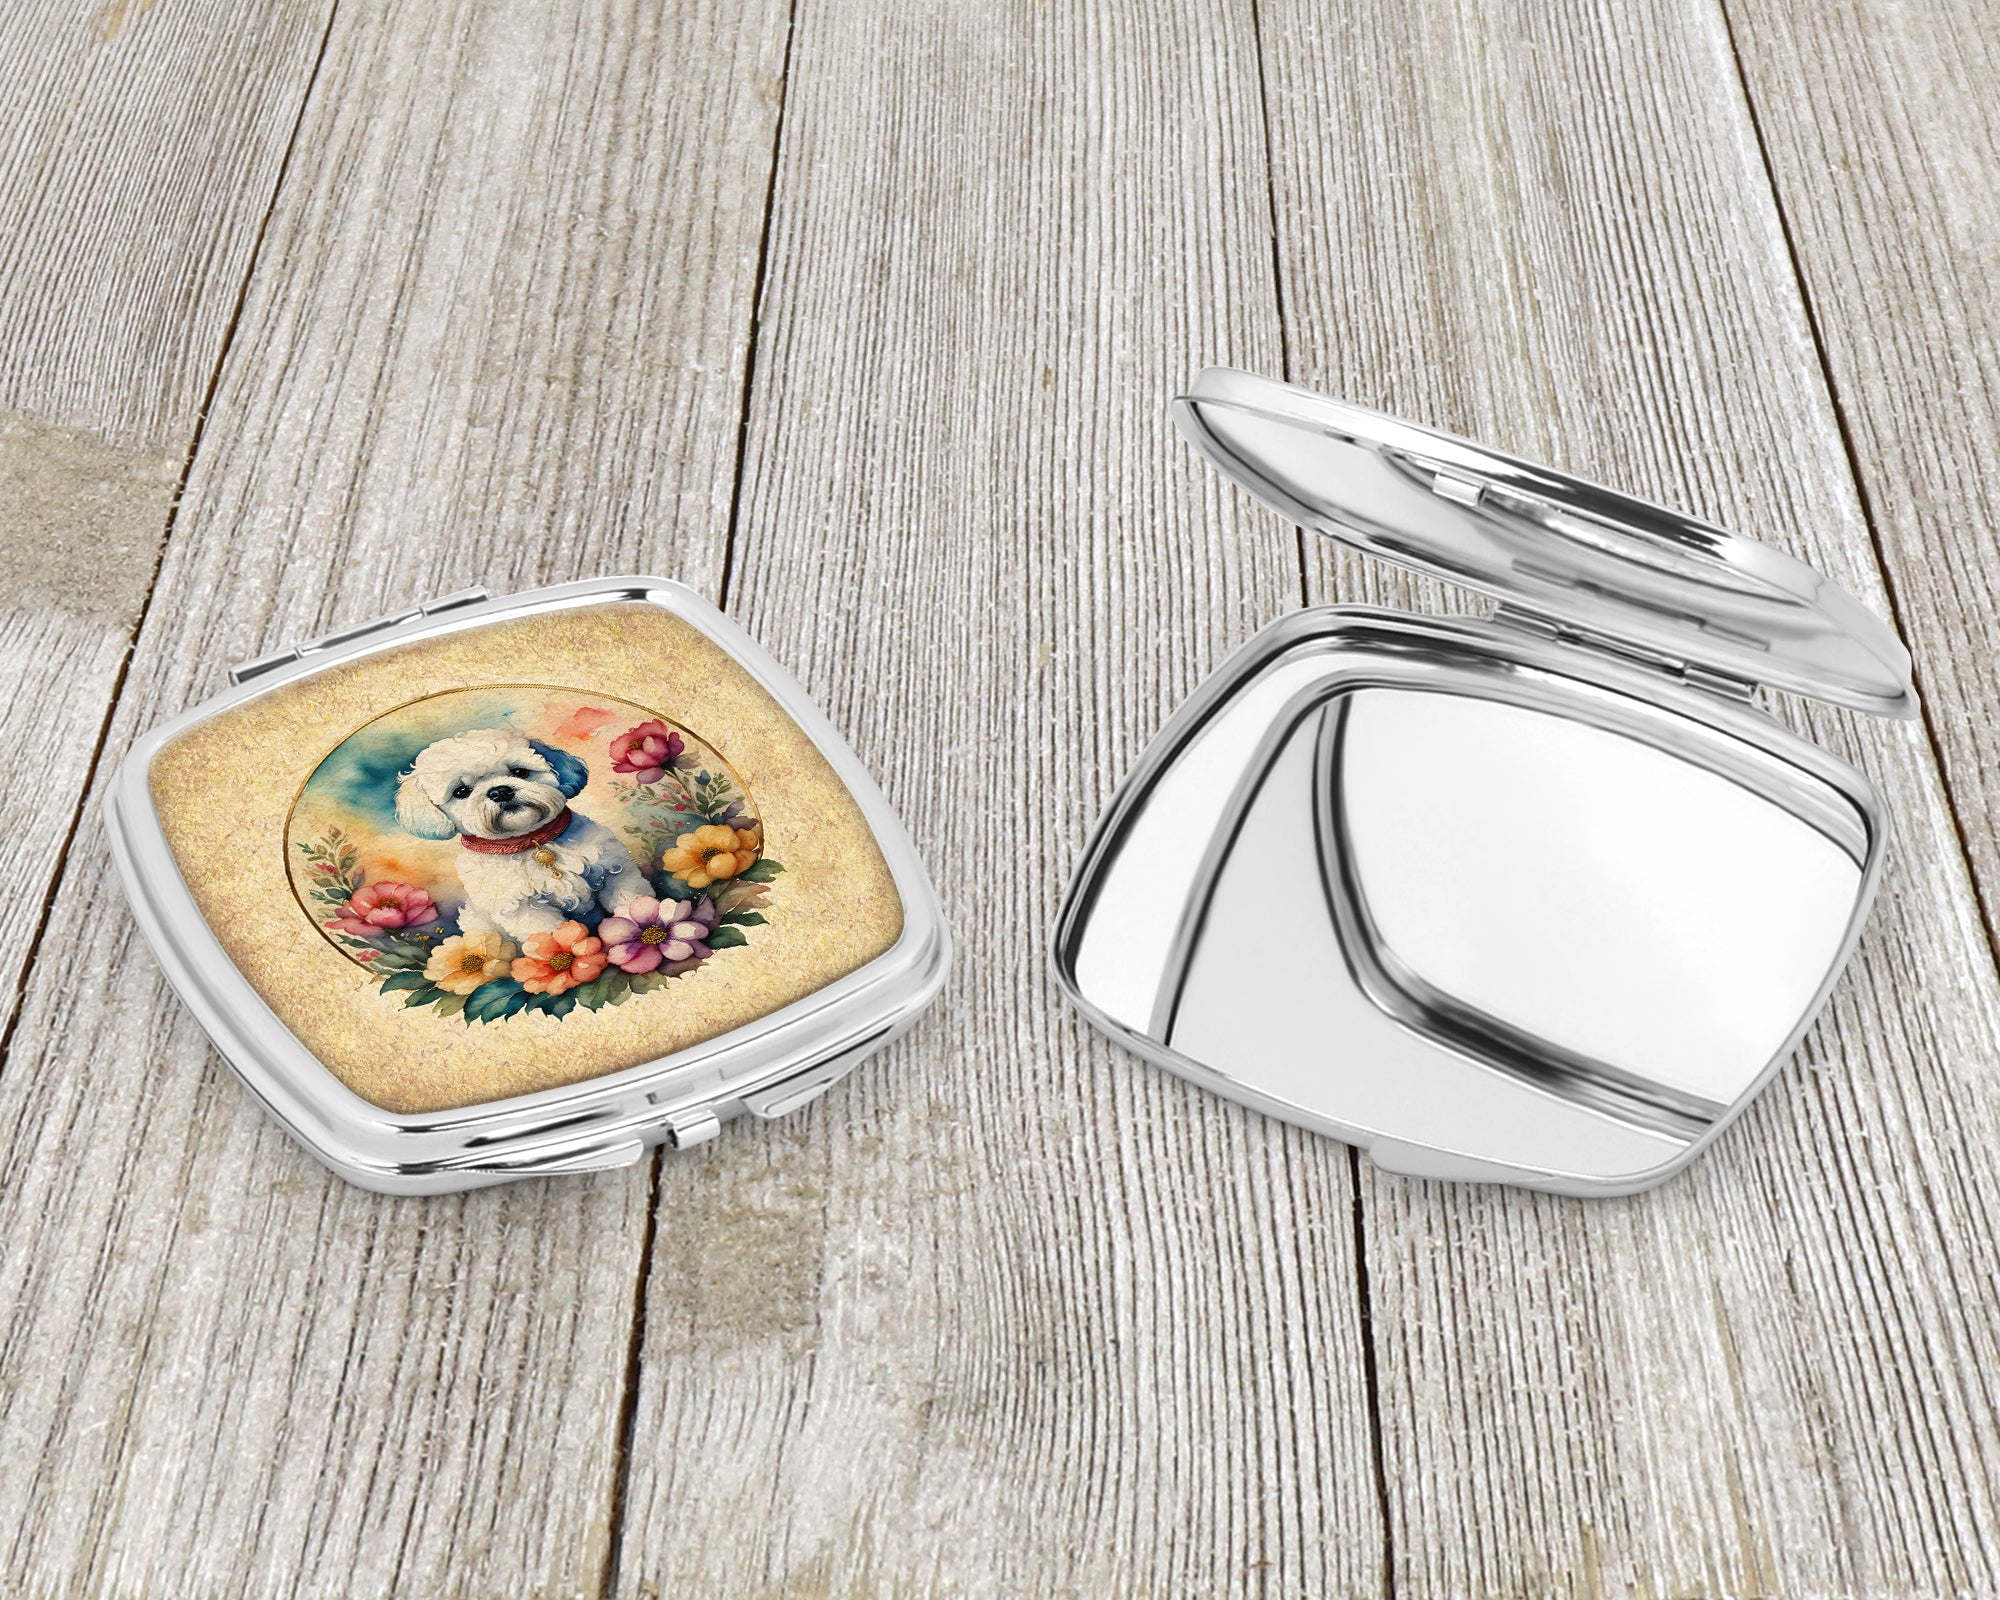 Bichon Frise and Flowers Compact Mirror